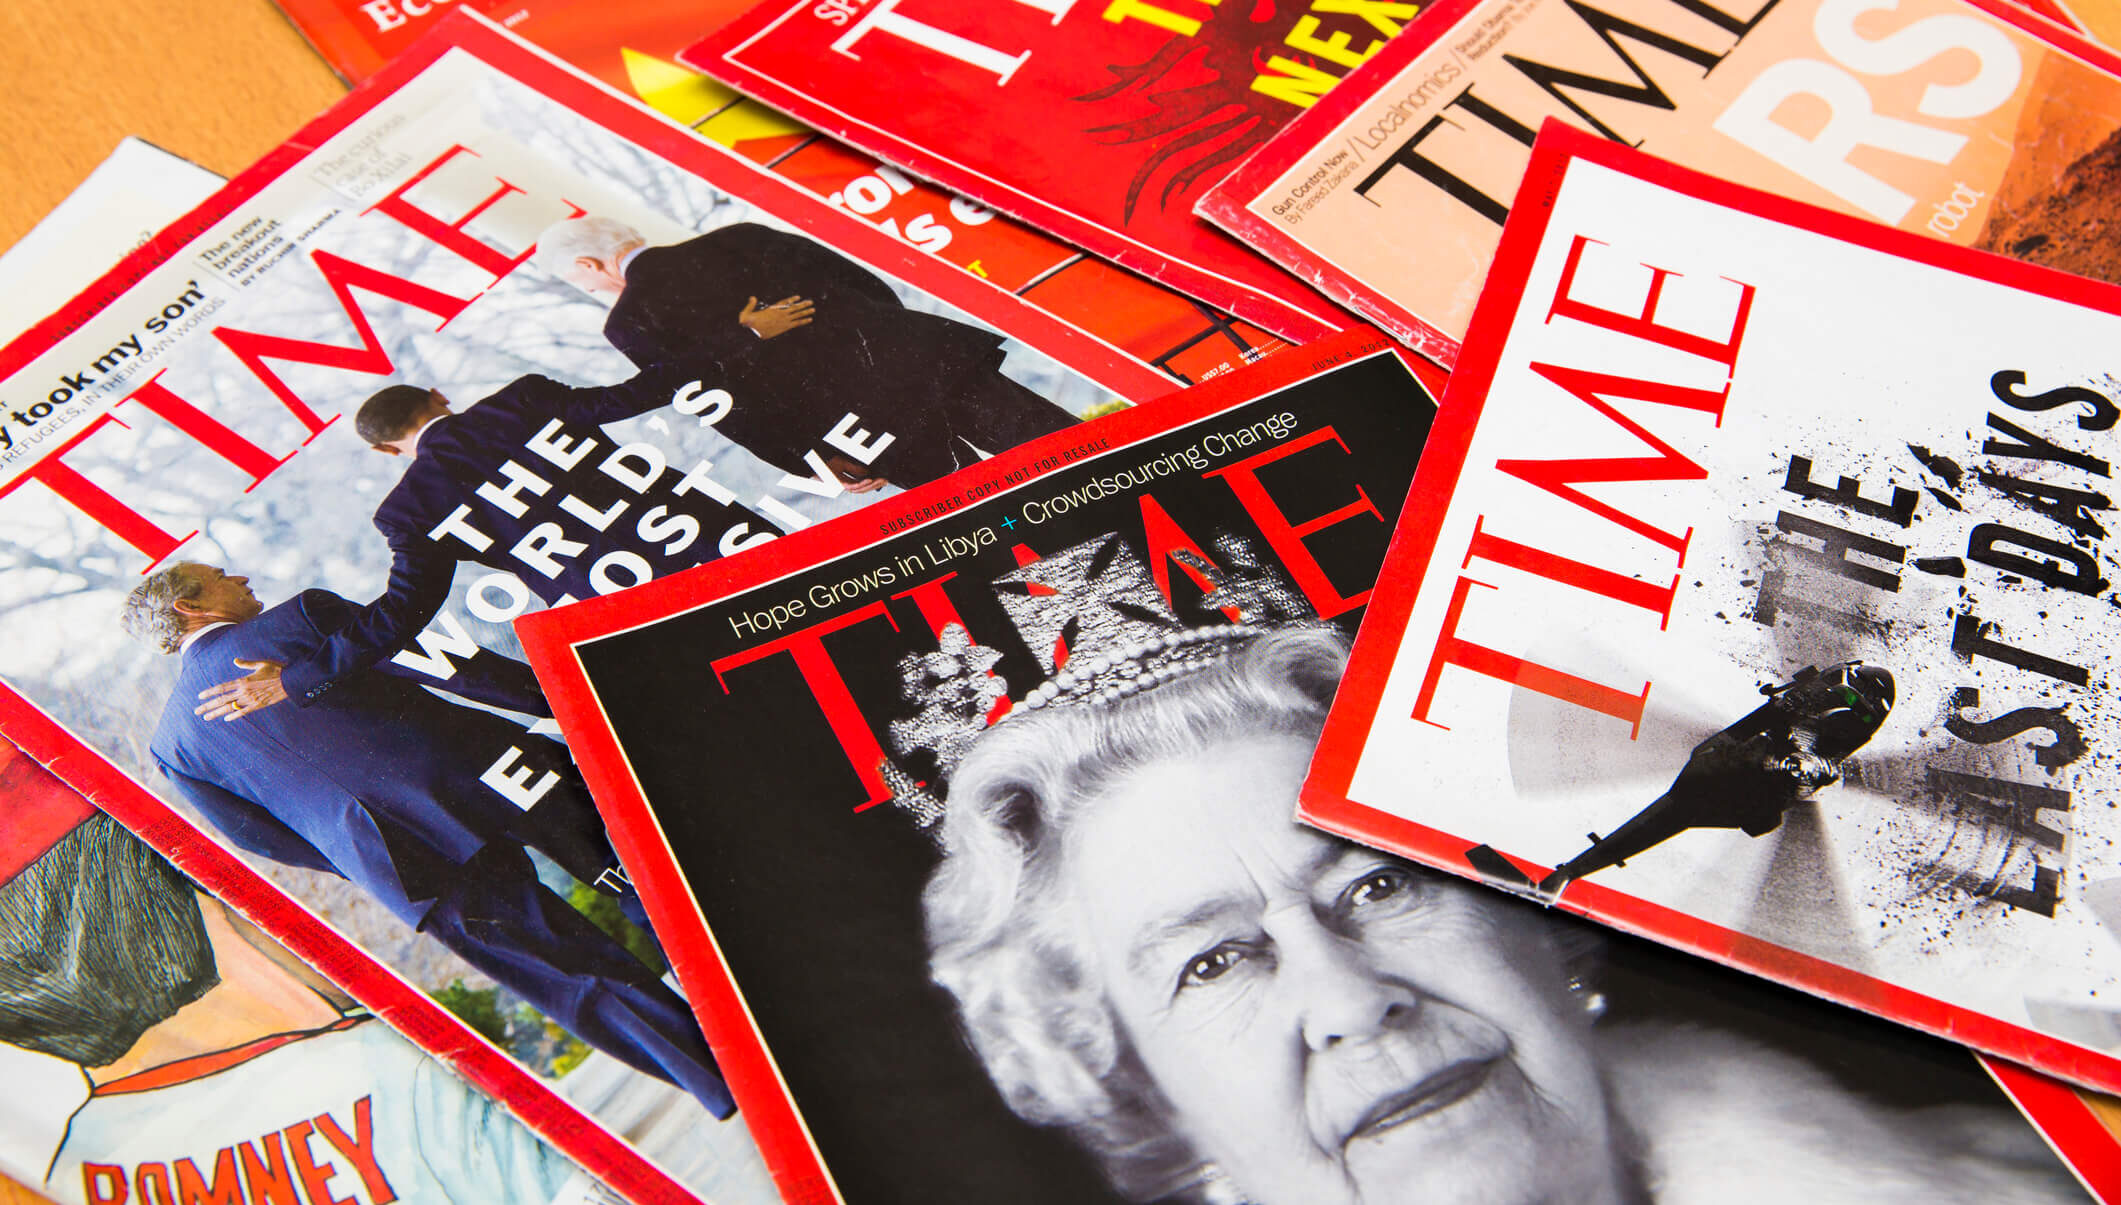 Time magazines (Yongyuan Dai/Getty Images)